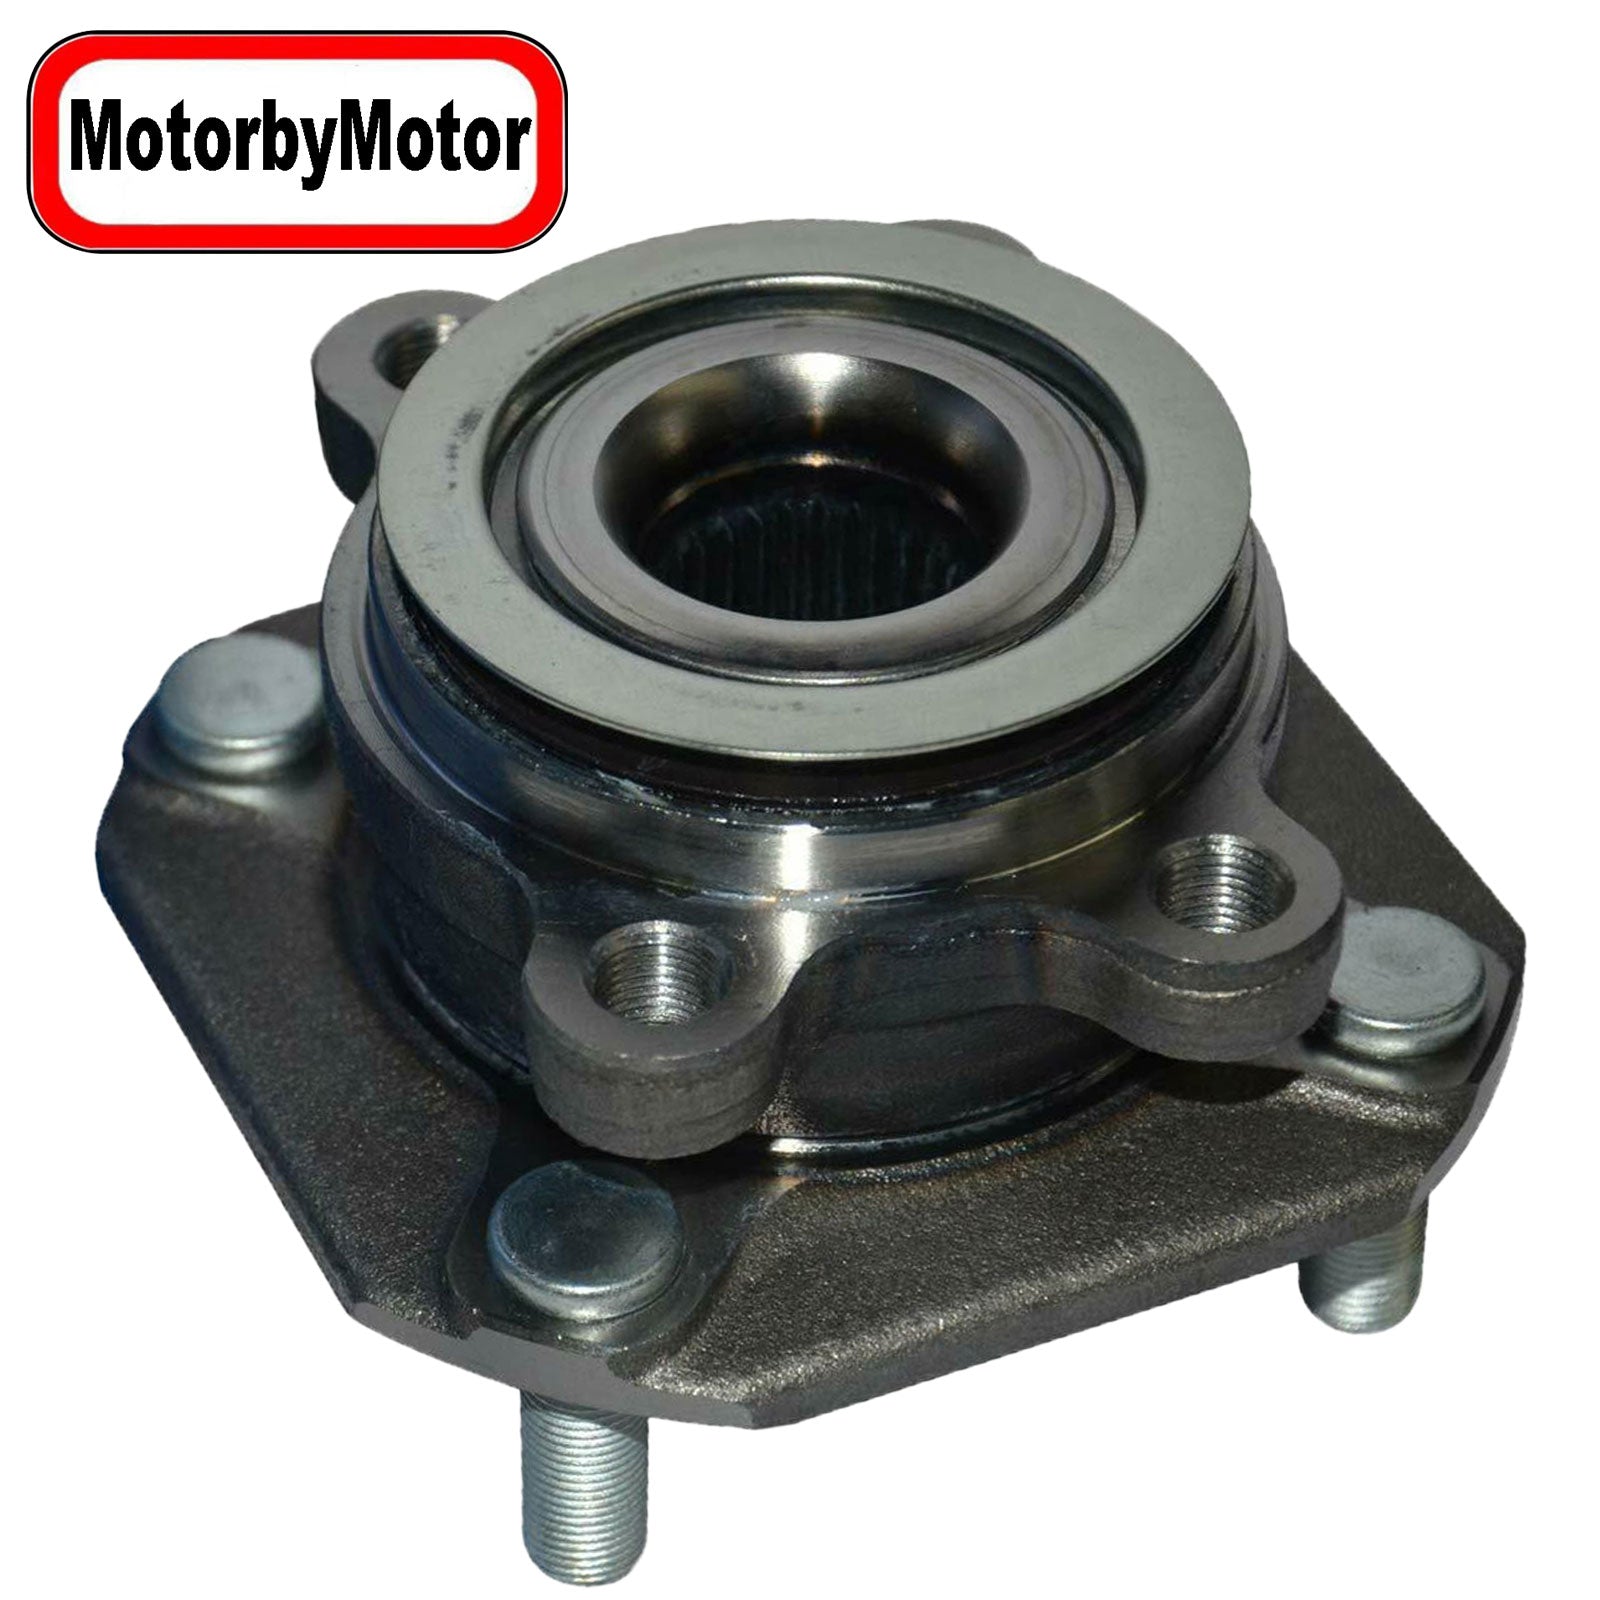 MotorbyMotor 513297 Front Wheel Bearing and Hub Assembly with 4 Lugs fits for Nissan Sentra Low-Runout OE Directly Replacement Hub Bearing w/ABS MotorbyMotor